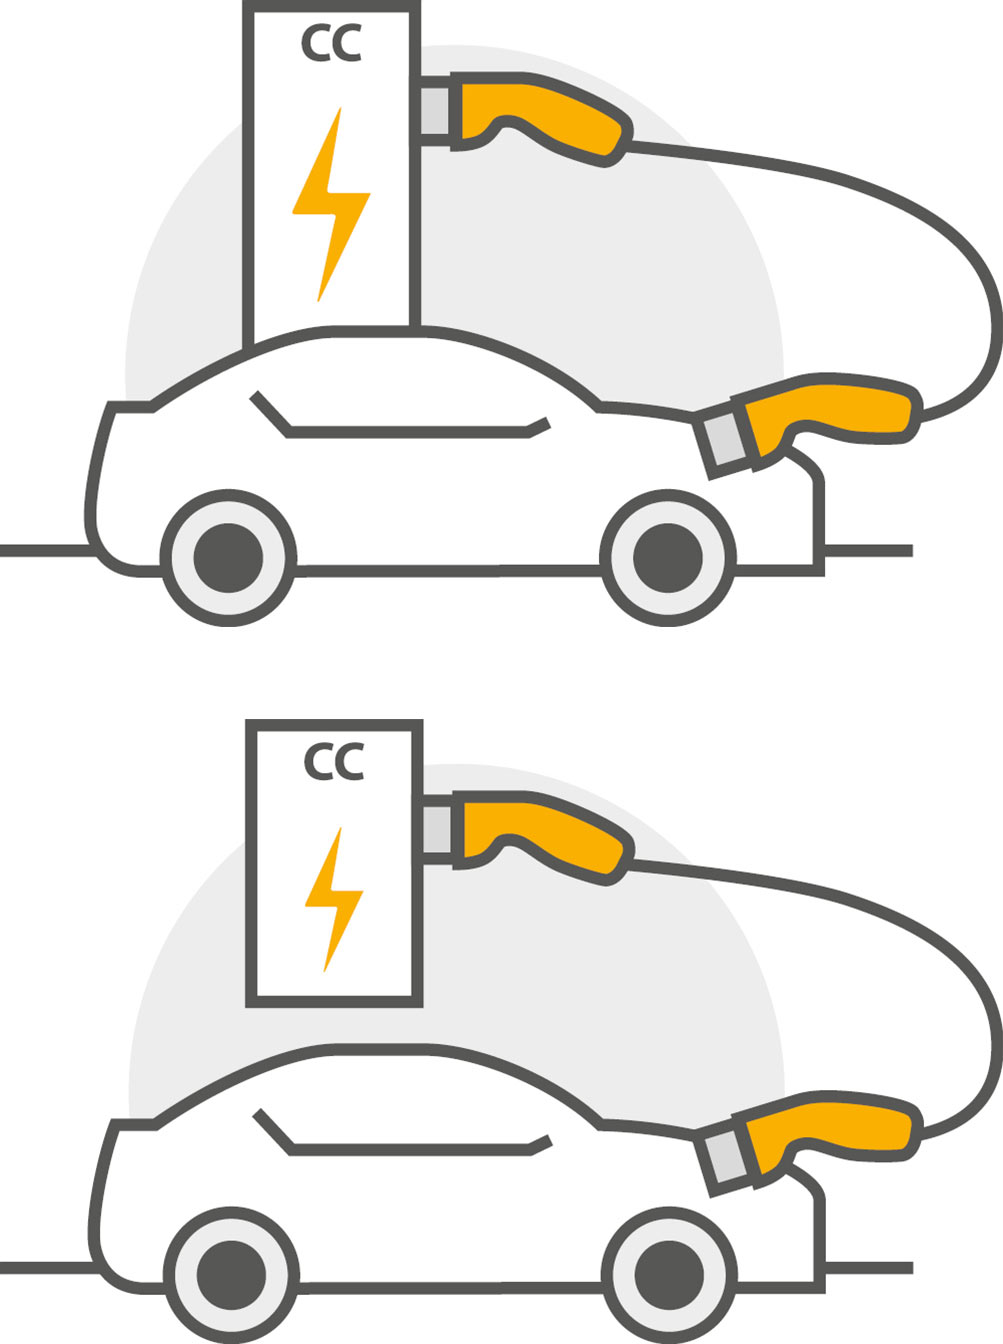 An illustration of two cars being charged via the charging plug on the electric car and the charging plug in the wallbox.